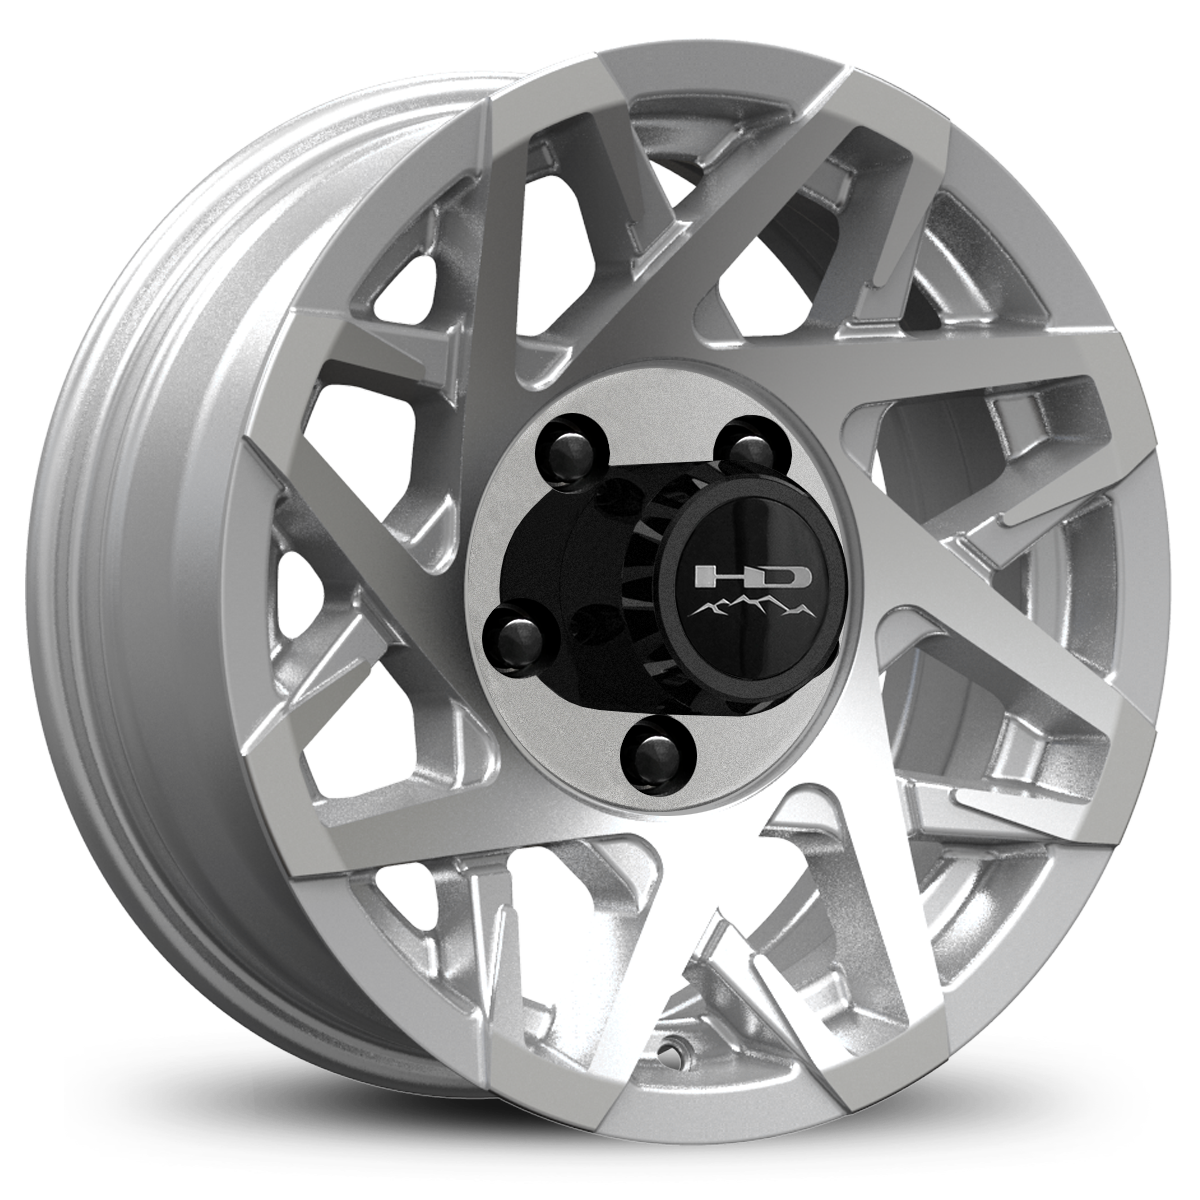 HD Off-Road Canyon Custom Trailer Wheel Rims in 14x5.5 Gloss Silver Machined Face with Center Cap & Logo fits 5x4.50 / 5x114.3 Axle Boat, Car, RV, Travel, Concession, Horse, Utility, Lawn & Garden, & Landscaping.